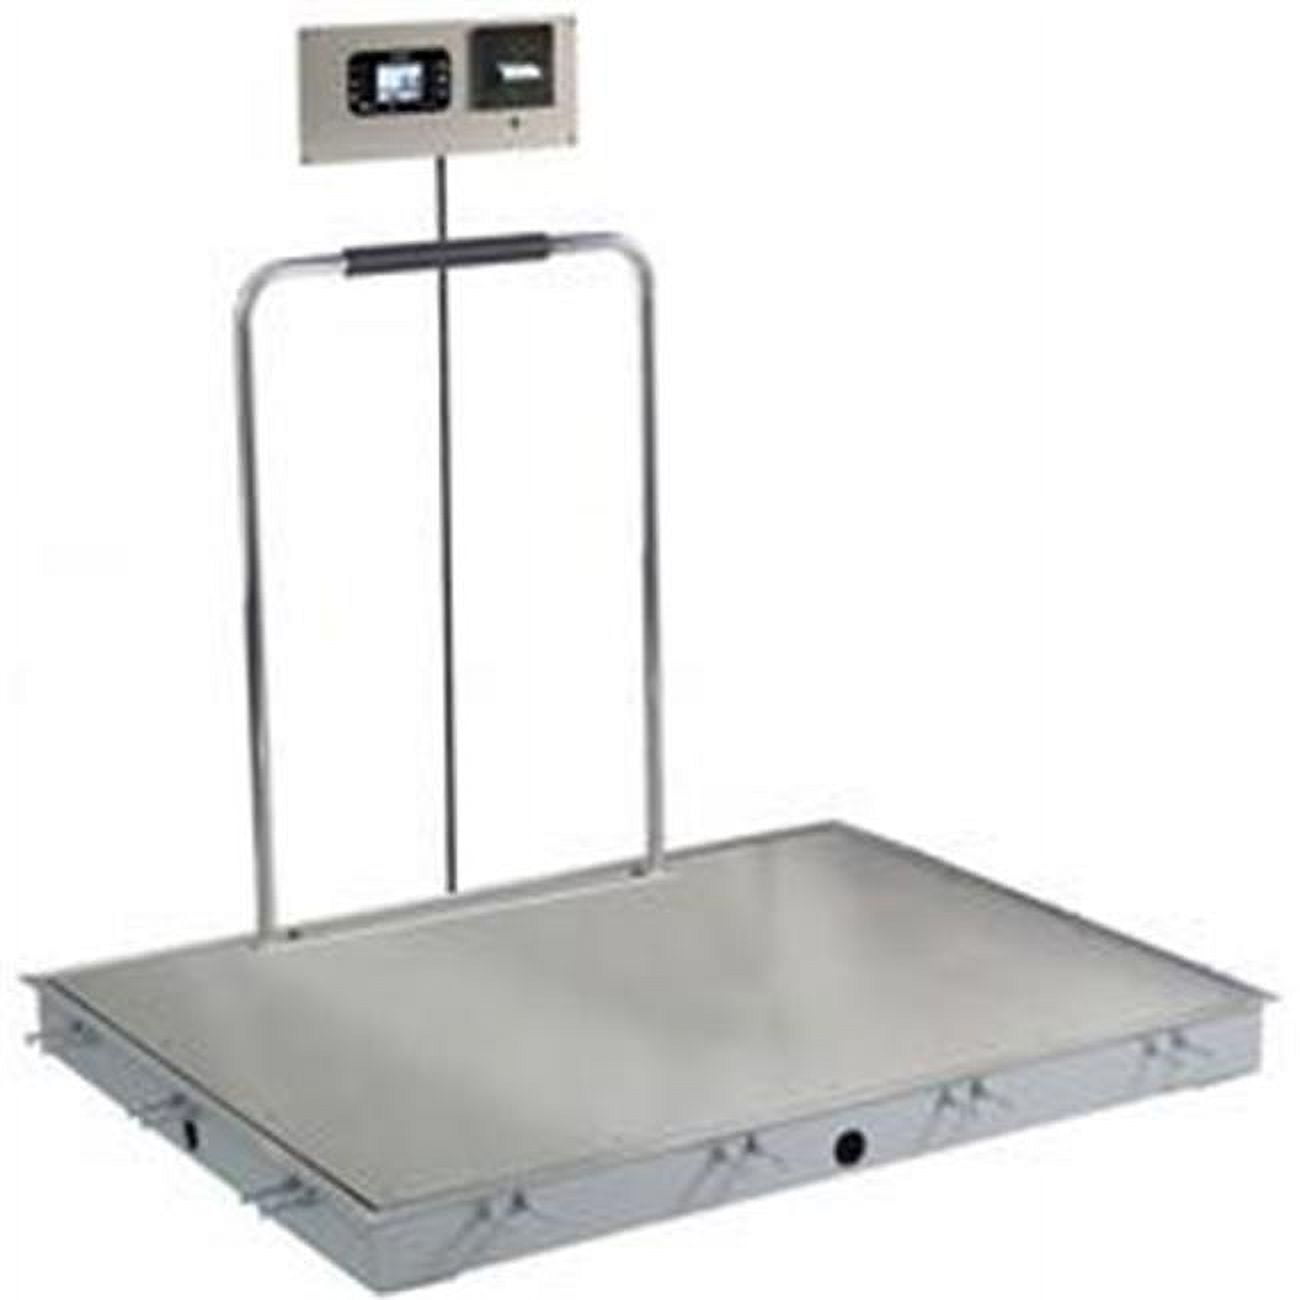 Cardinal Scales 48 X 48 In. In-floor Dialysis Scale - Stainless Steel Deck, Hand Rail, 855 Recessed Wall-mount Indicator With Printer